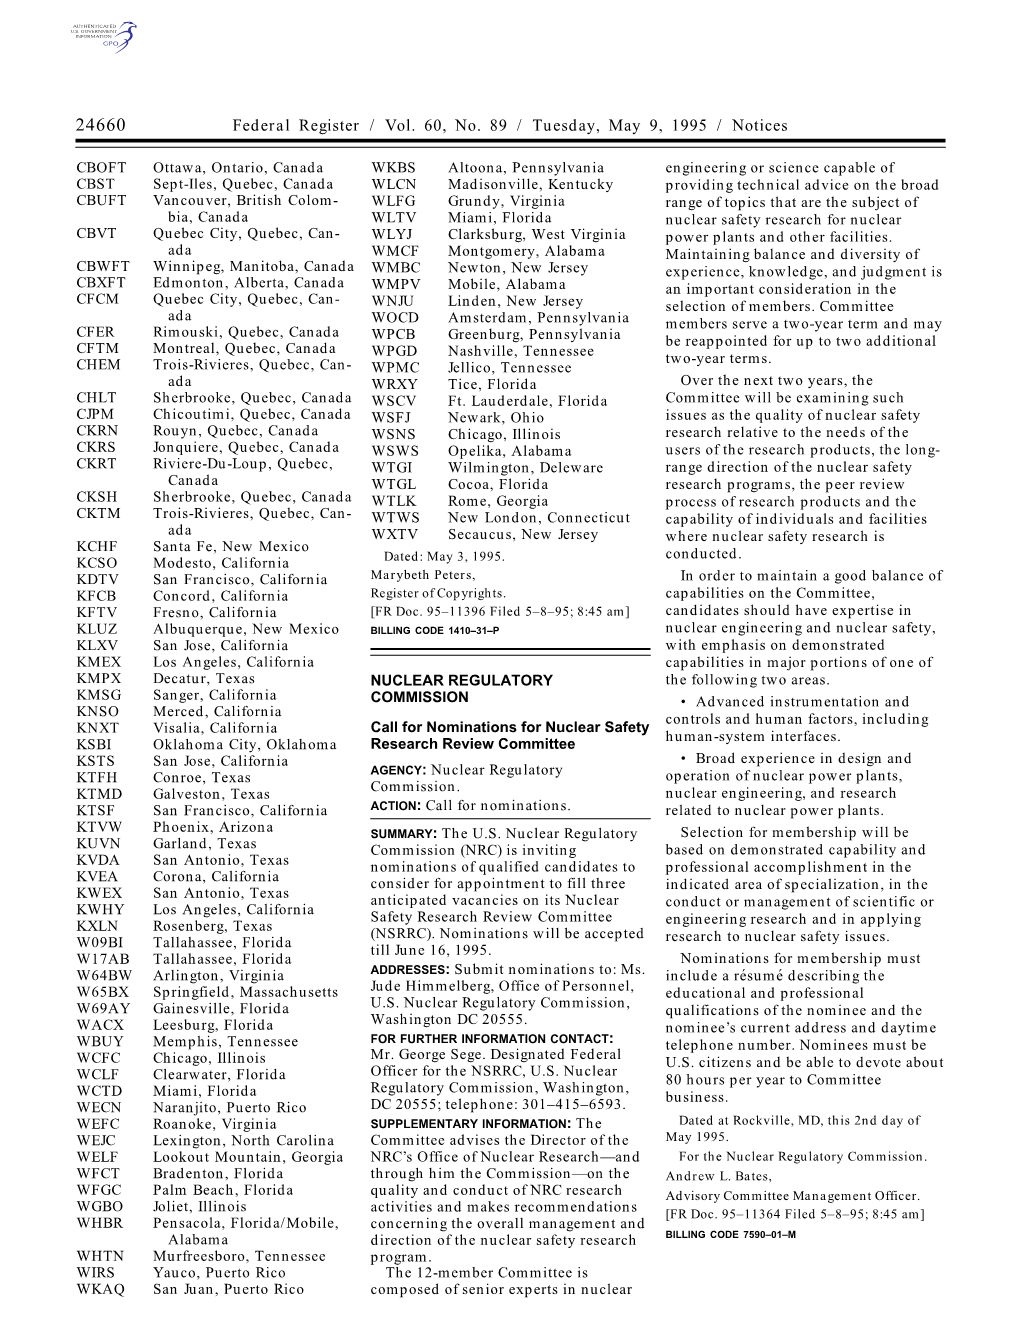 Federal Register / Vol. 60, No. 89 / Tuesday, May 9, 1995 / Notices